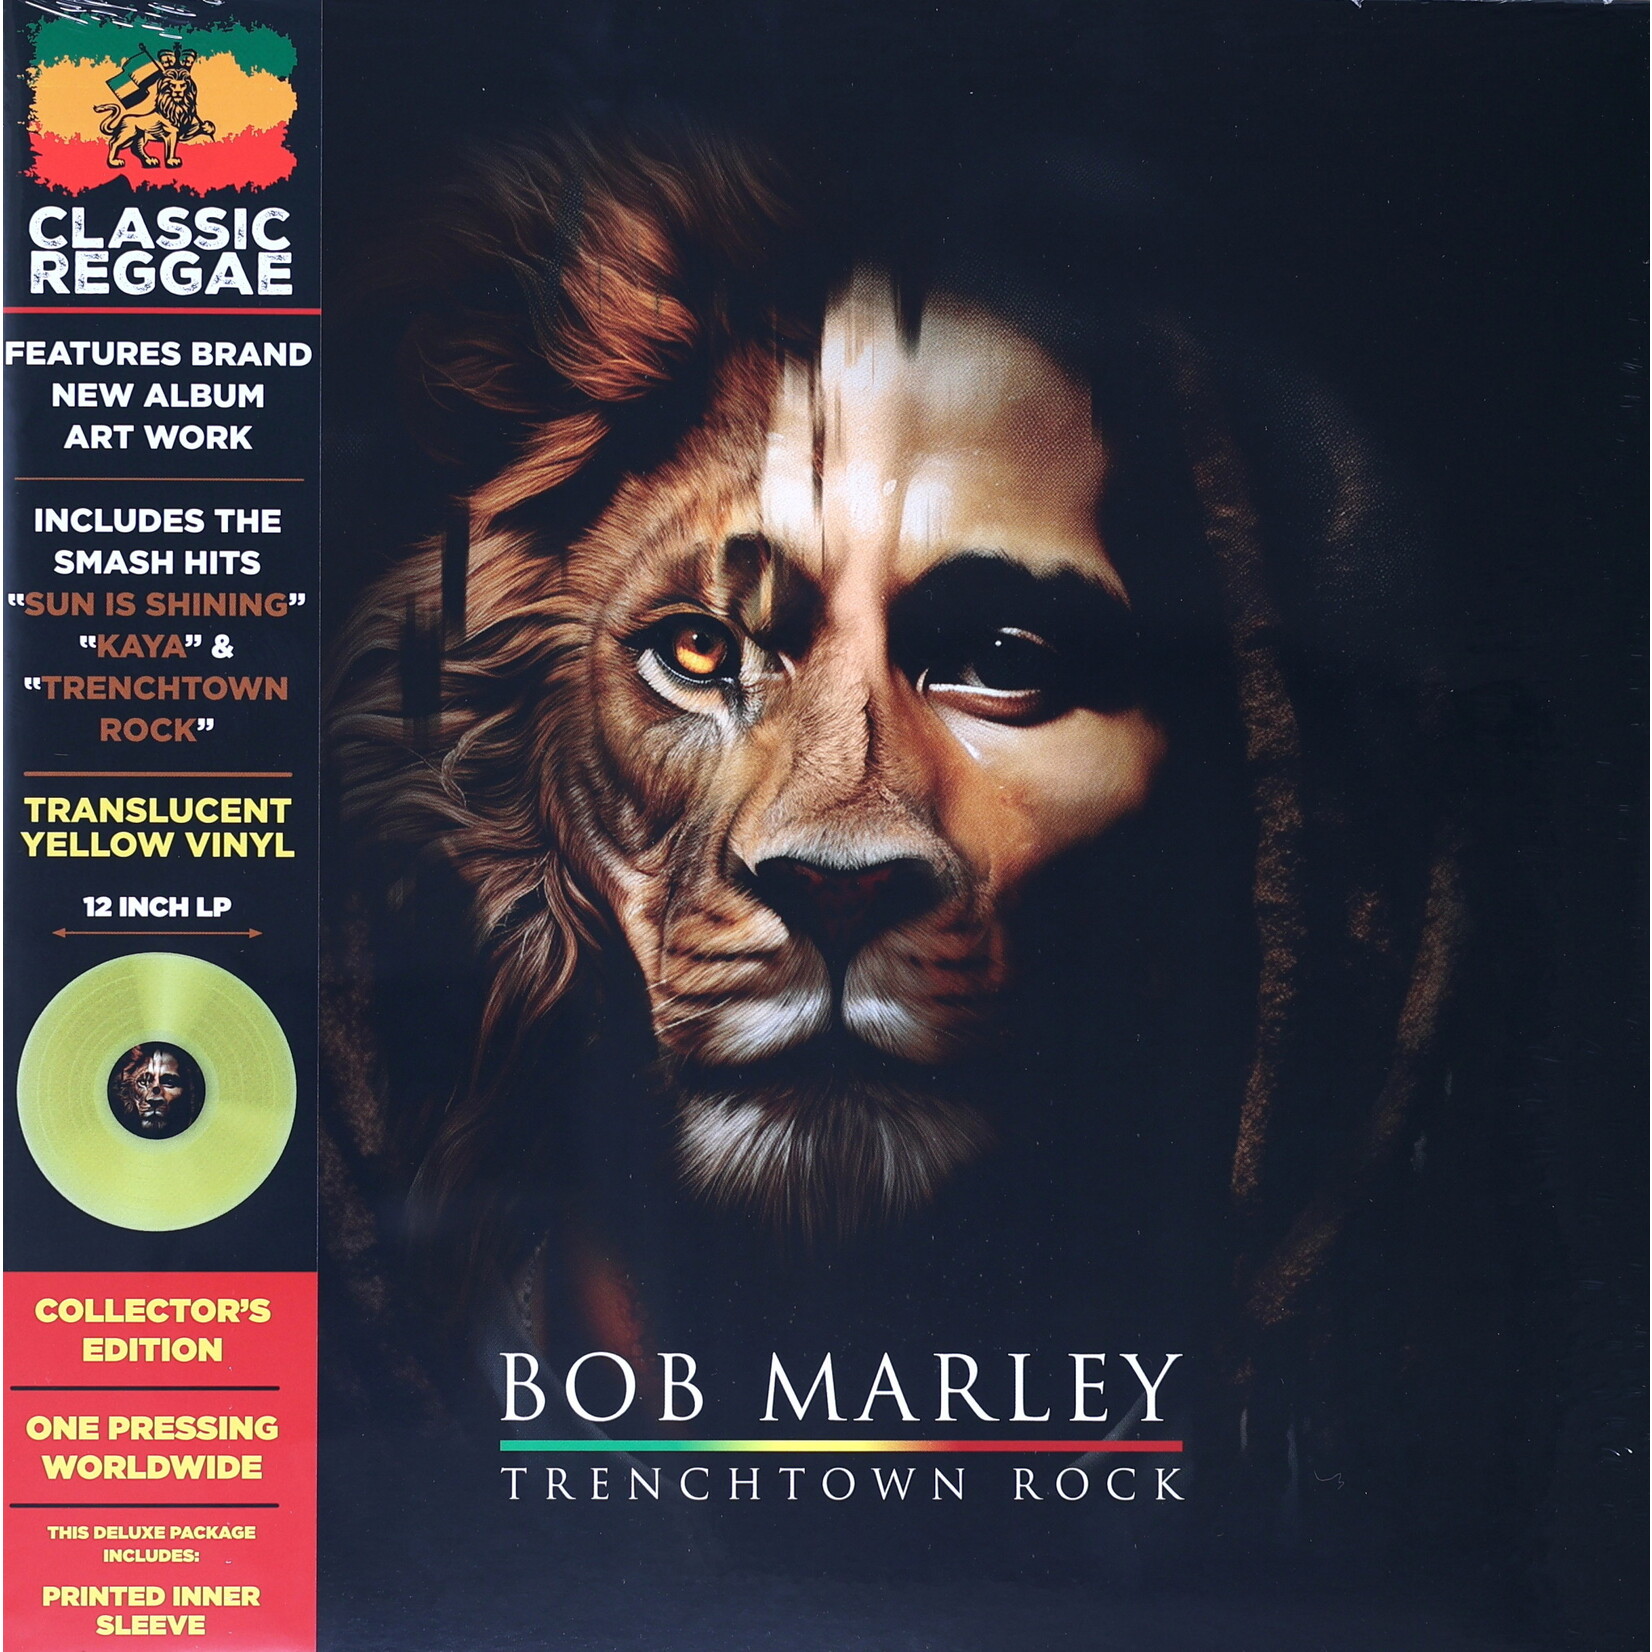 BOB MARLEY - TRENCHTOWN ROCKERS - LTD REMASTERED COLORED YELLOW LP